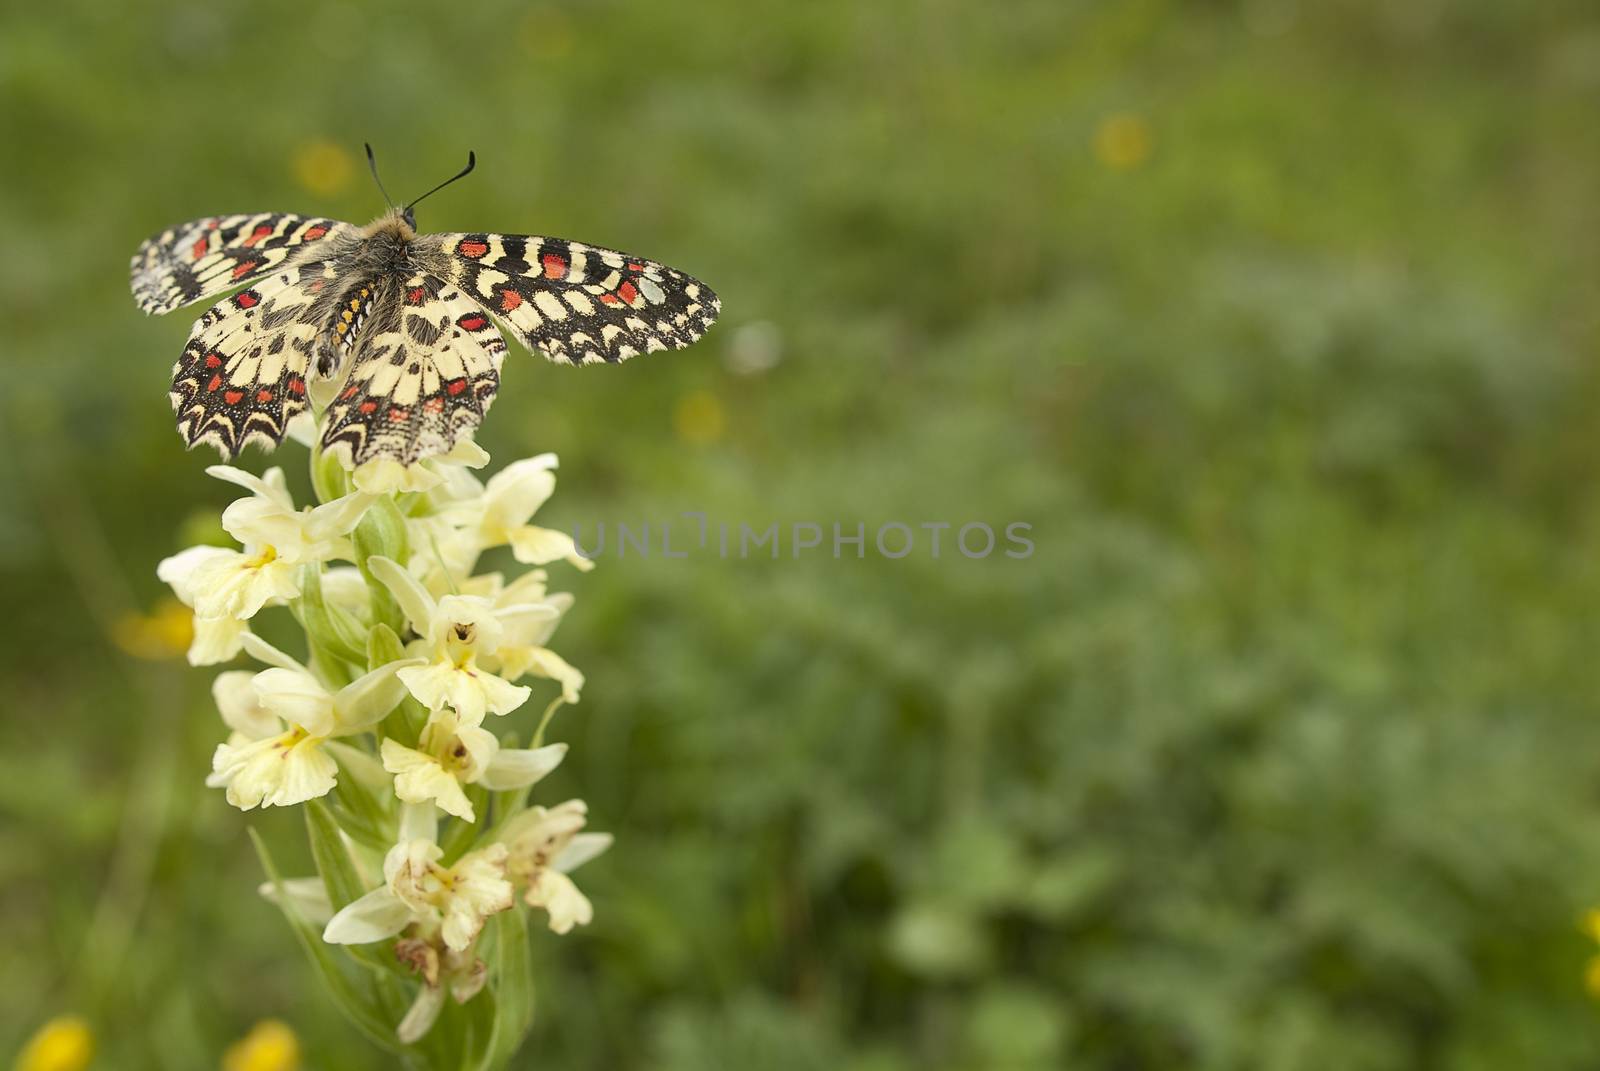 Spanish Festoon butterfly Zerynthia rumina perched on an orchid, Orchis insularis